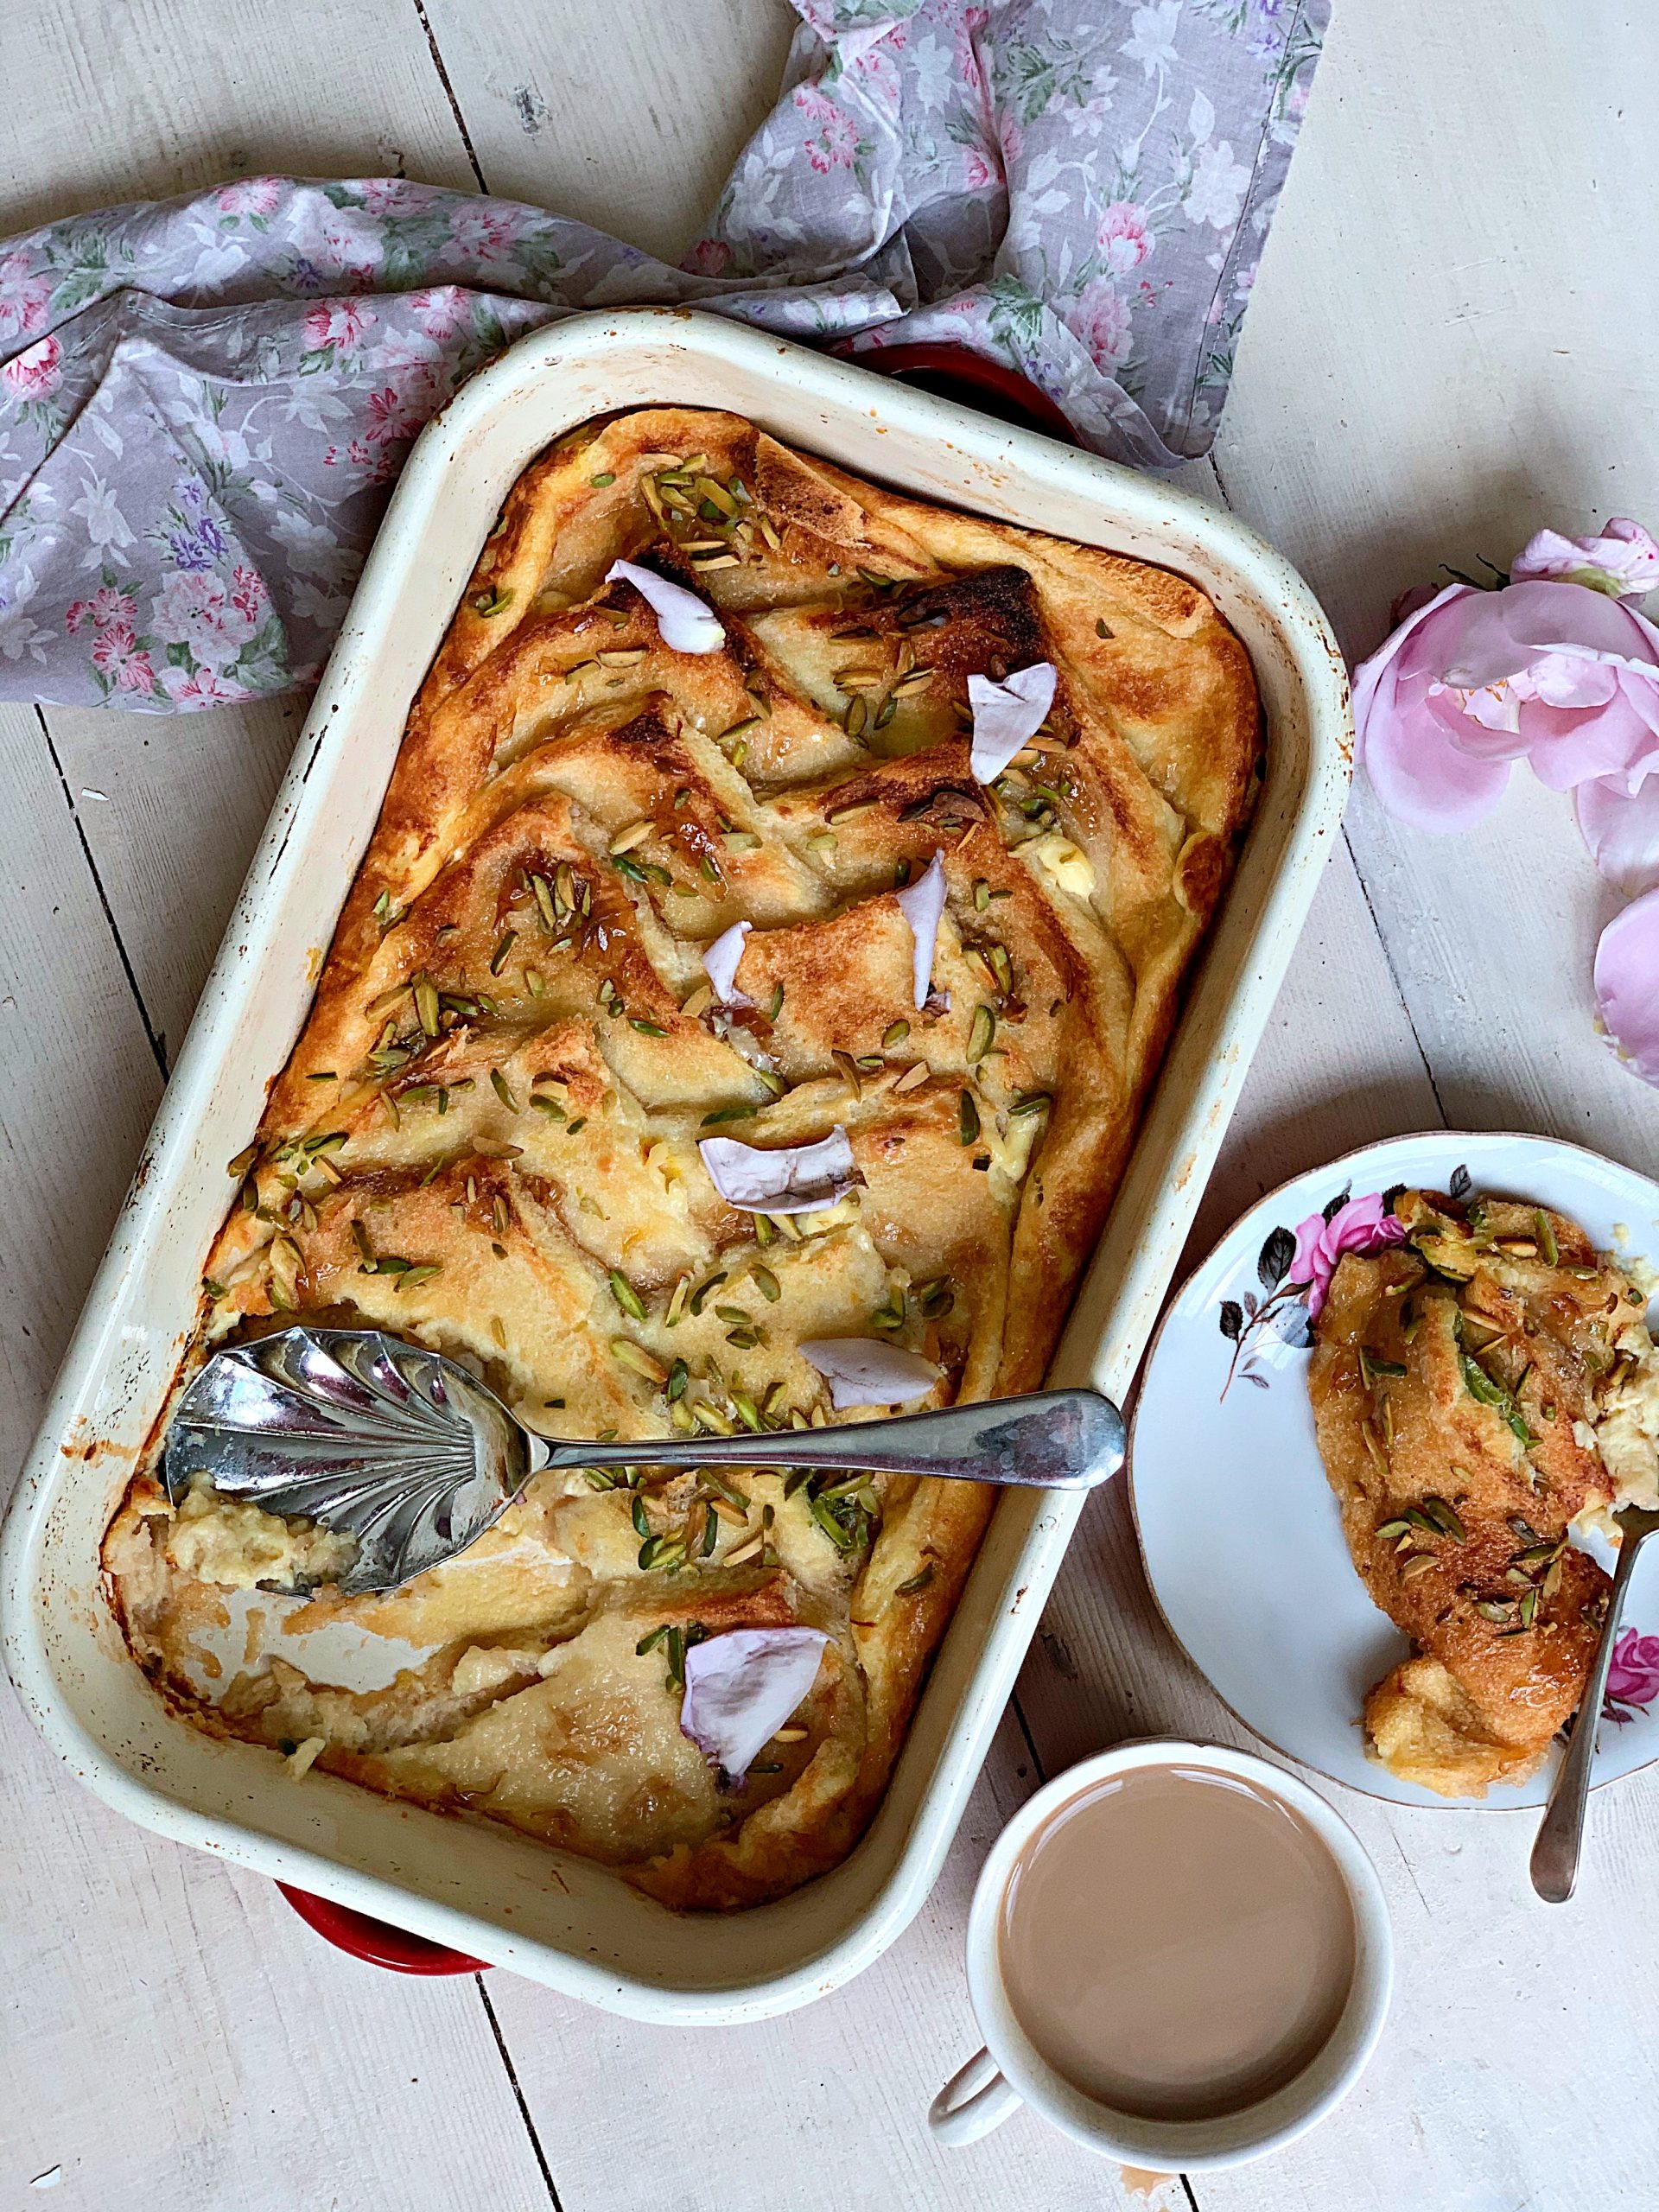 rose, saffron and pistachio bread and butter pudding pic: Kerstin rodgers/msmarmitelover.com